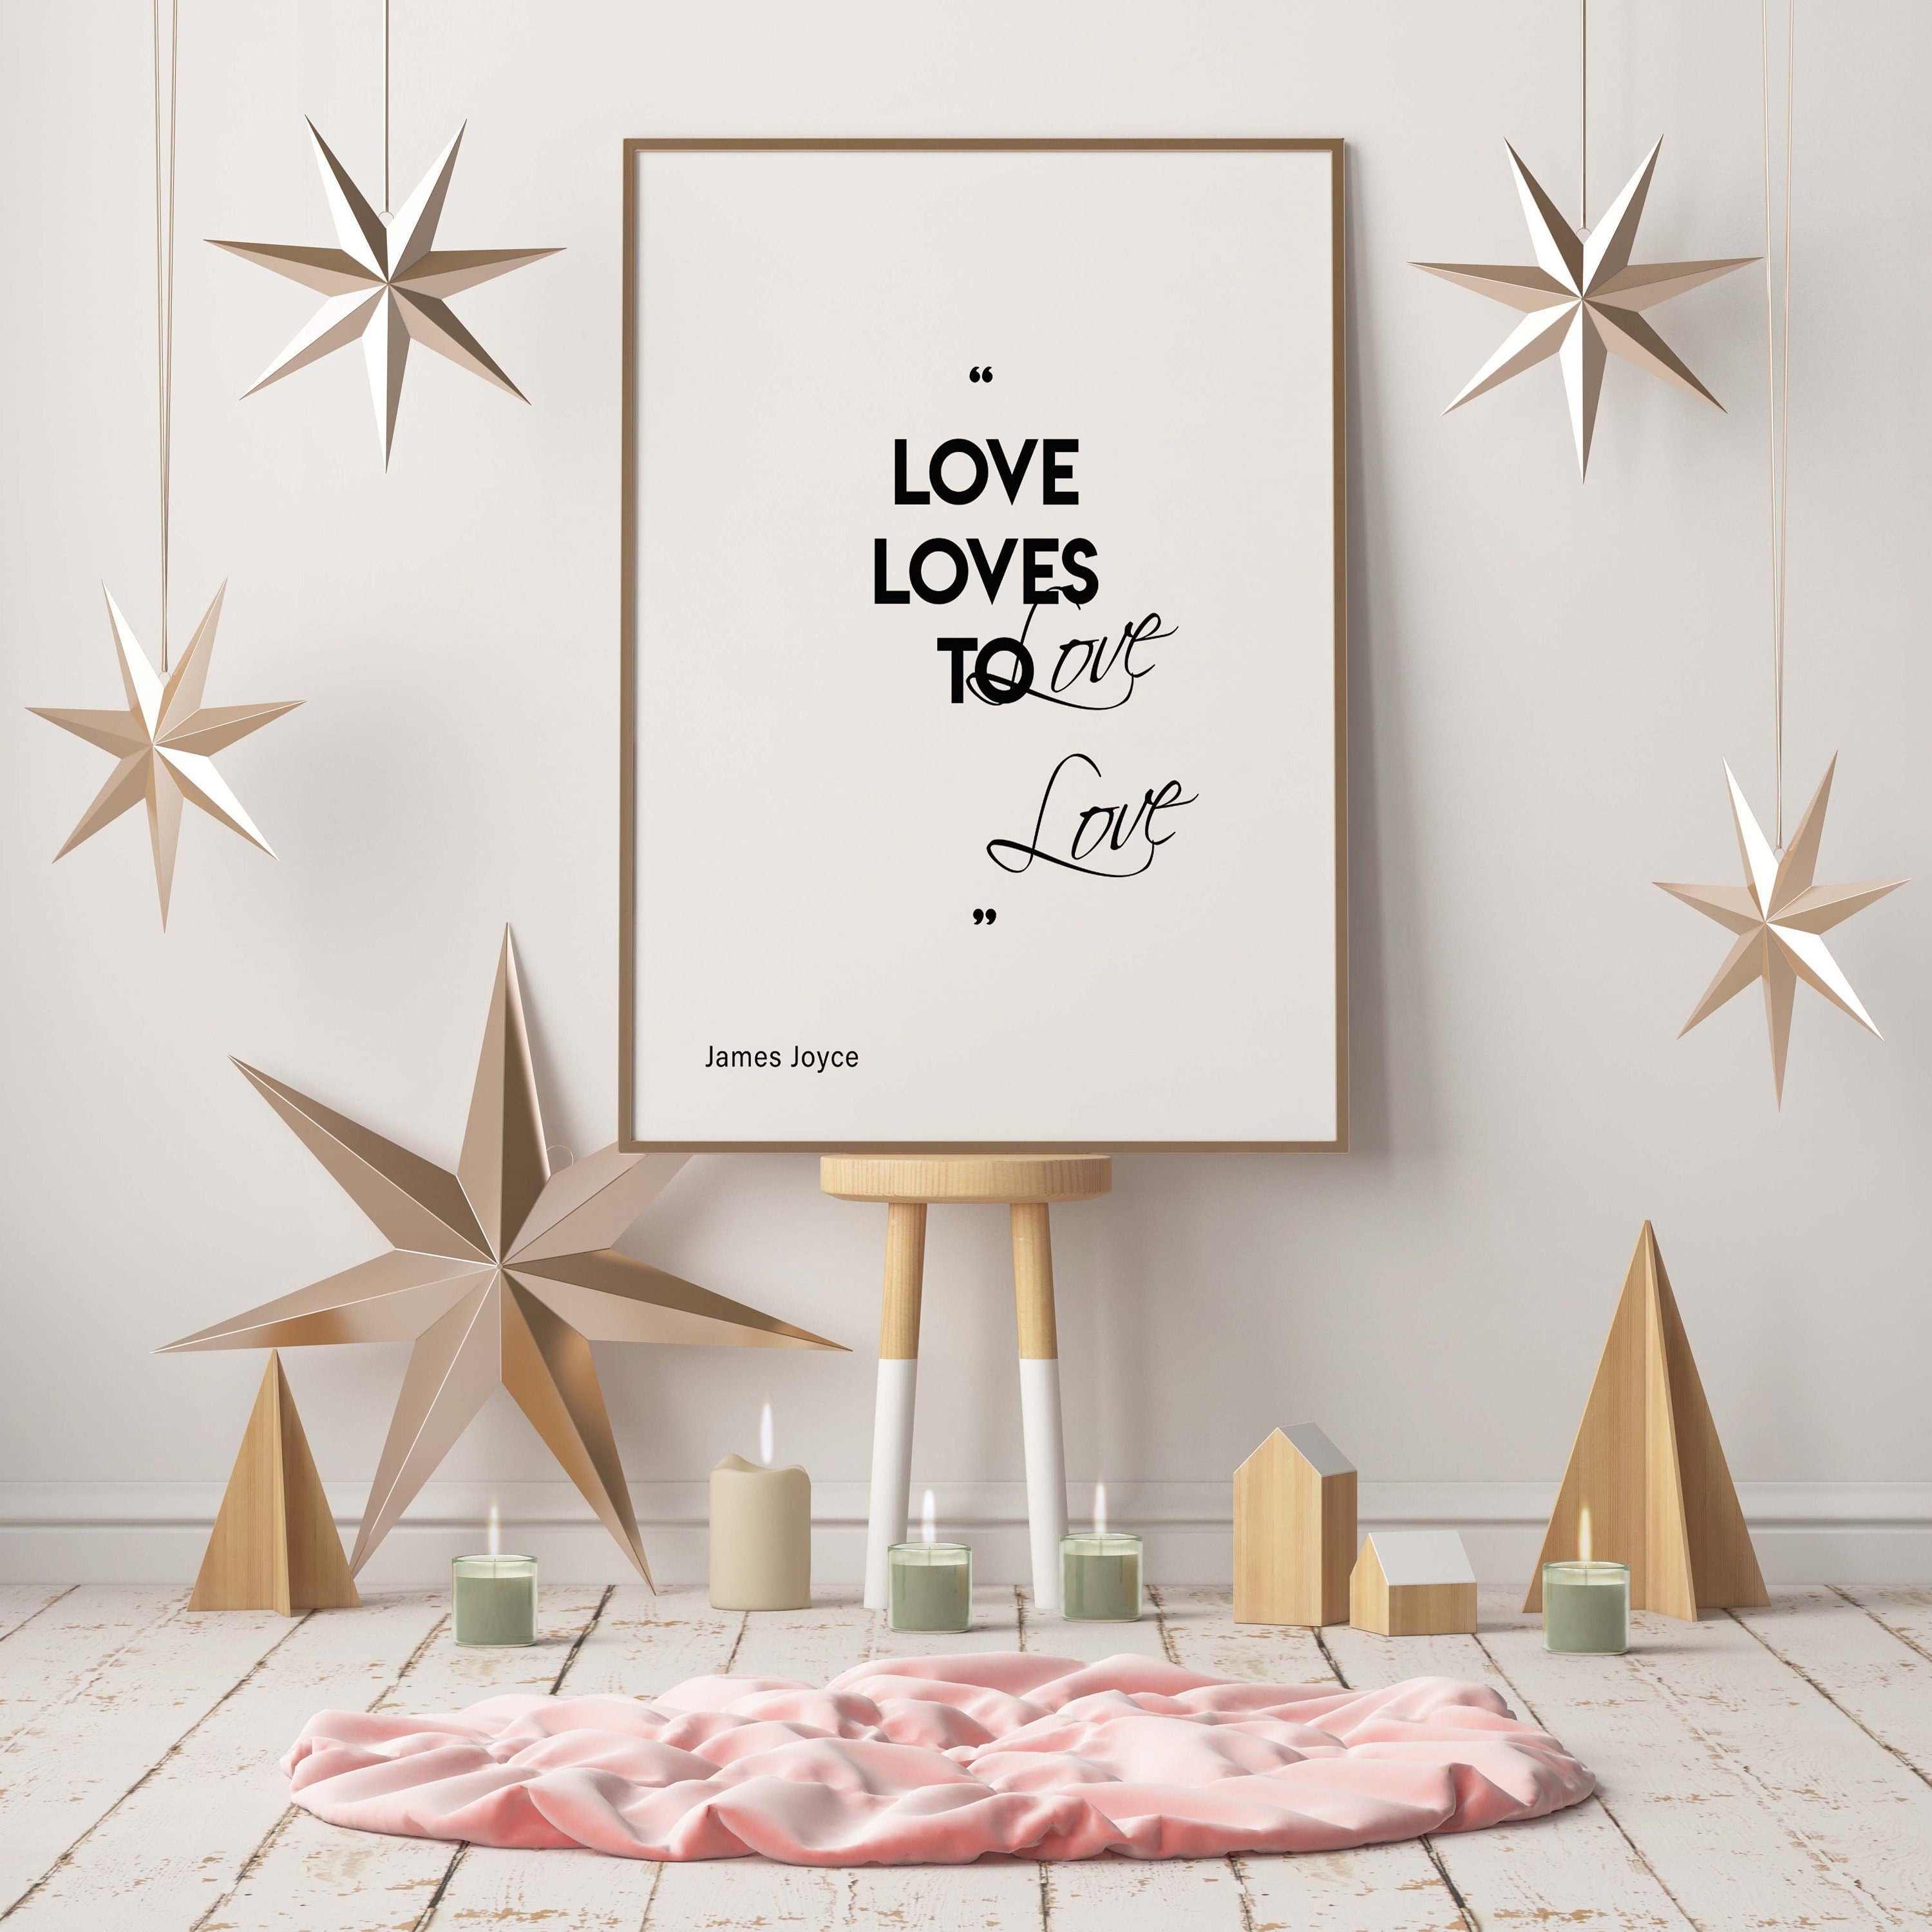 James Joyce Wall Art Prints, Ulysses Love Quote In Black And White - Love Loves To Love